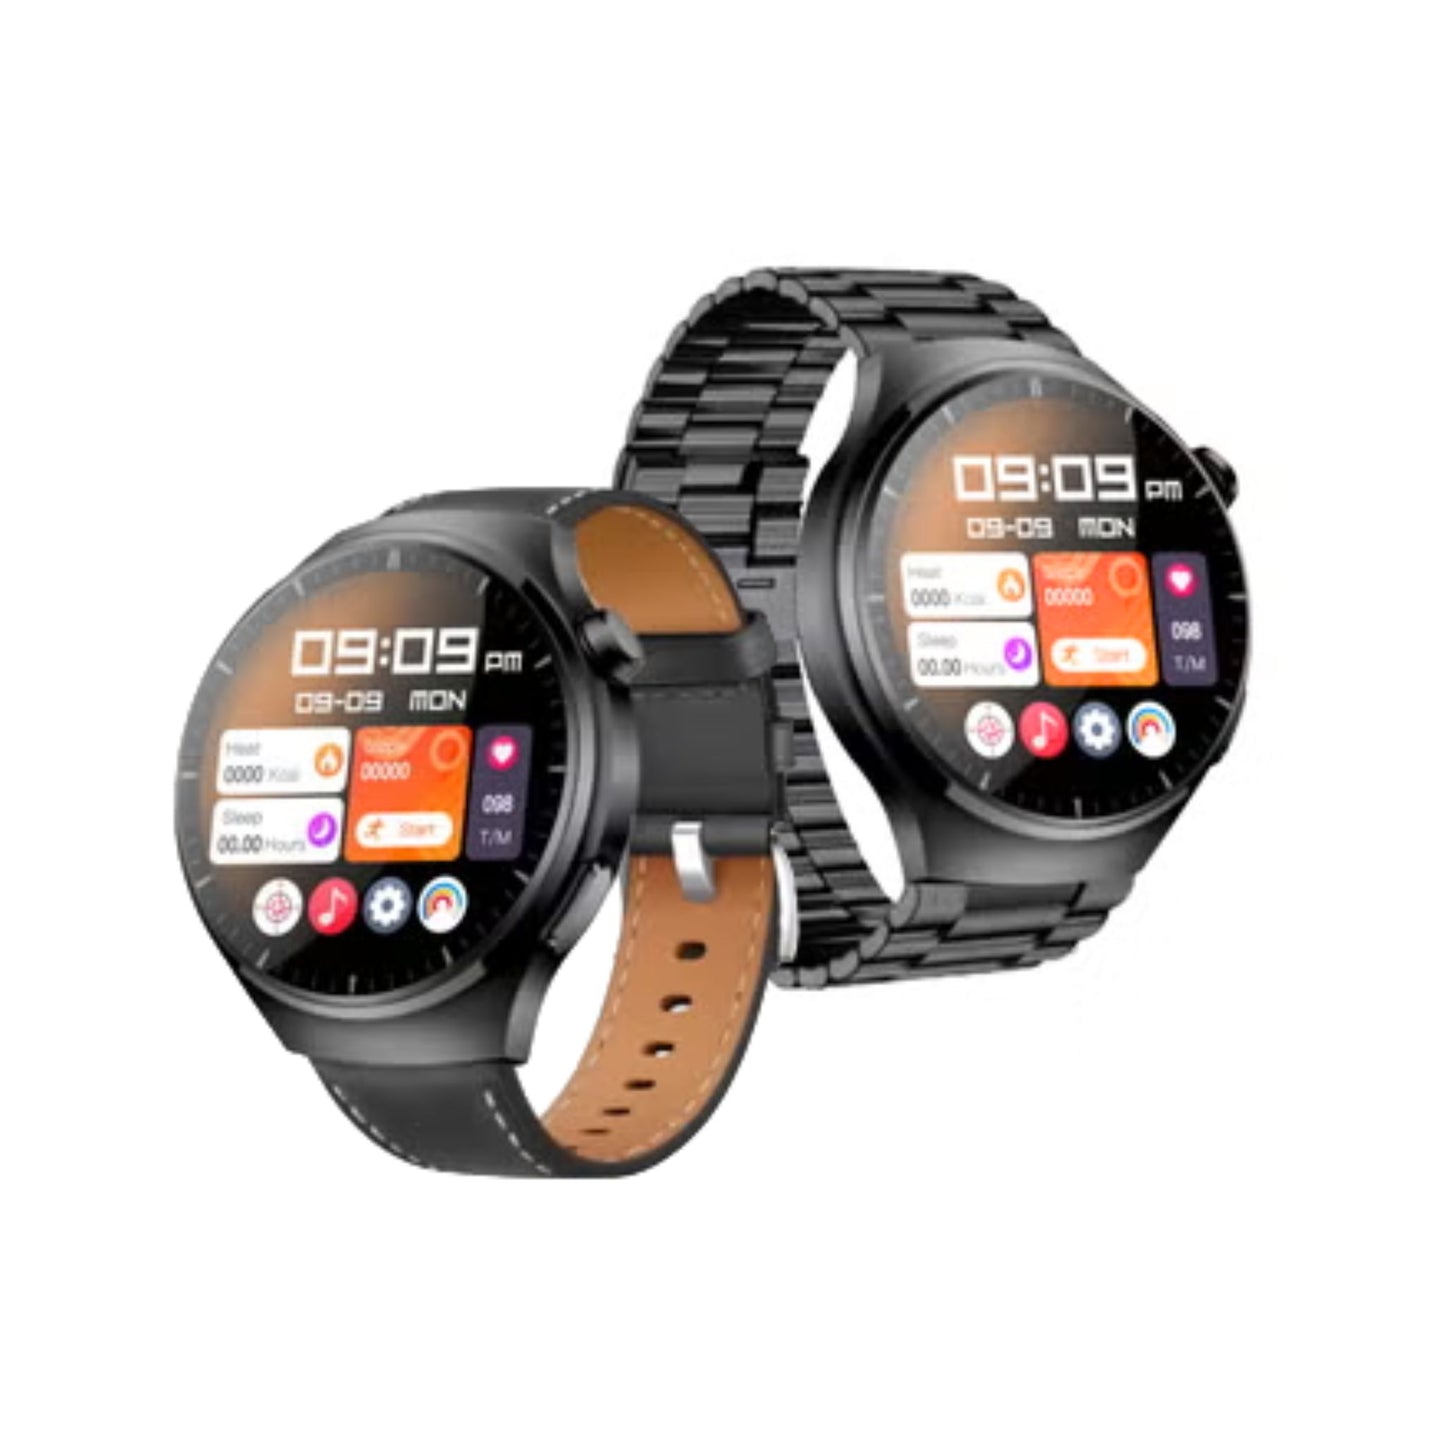 Homntel Germany Watch 4 Pro with 3 Straps HD IPS Amolded Display 480*480/490mAh Big Battery_Black